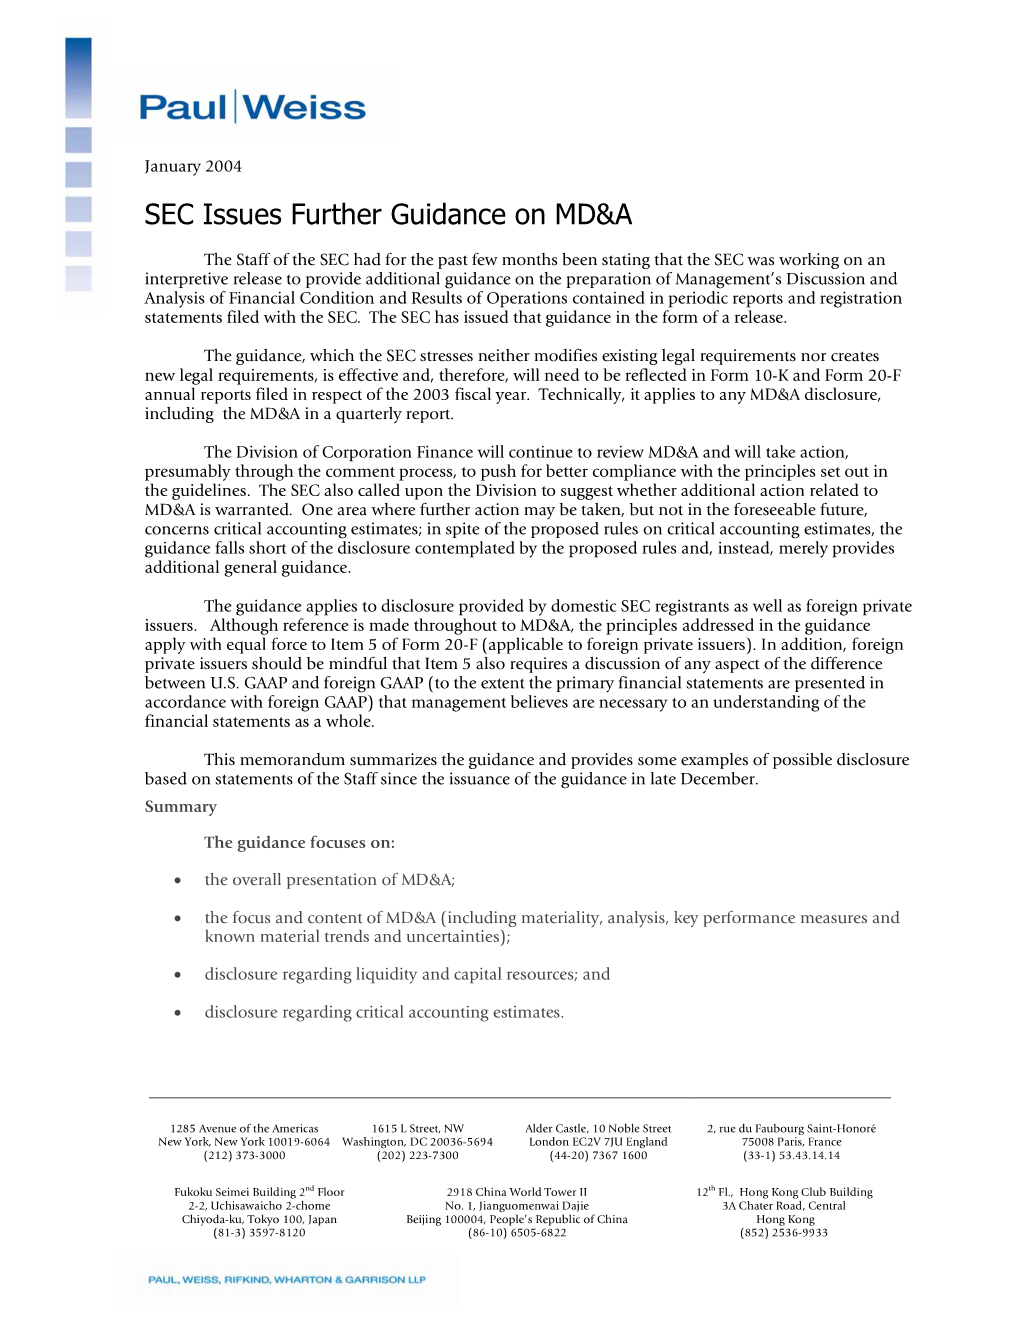 SEC Issues Further Guidance on MD&A